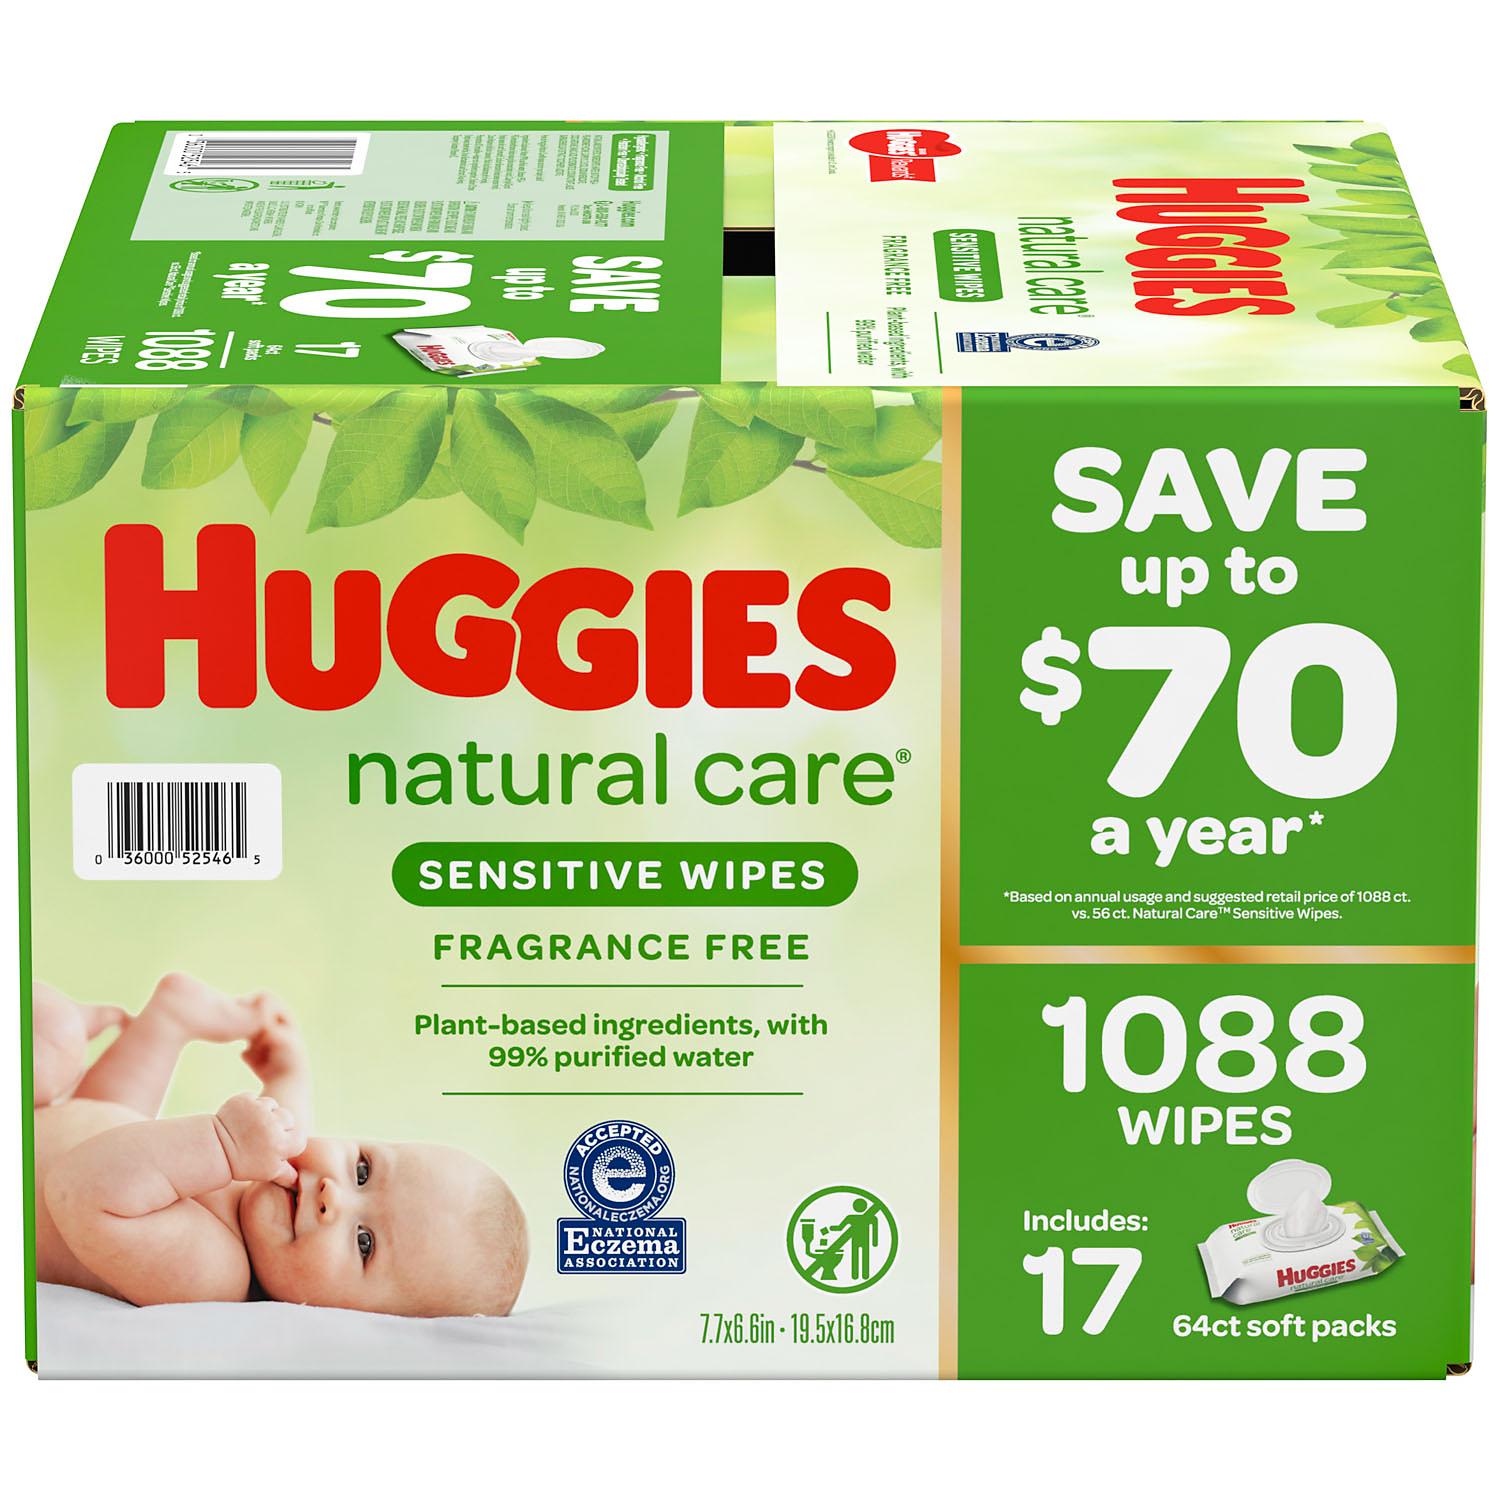 Huggies Natural Care Sensitive Baby Wipes, Unscented, (17 flip-top pks., 1088 wipes) - image 1 of 3